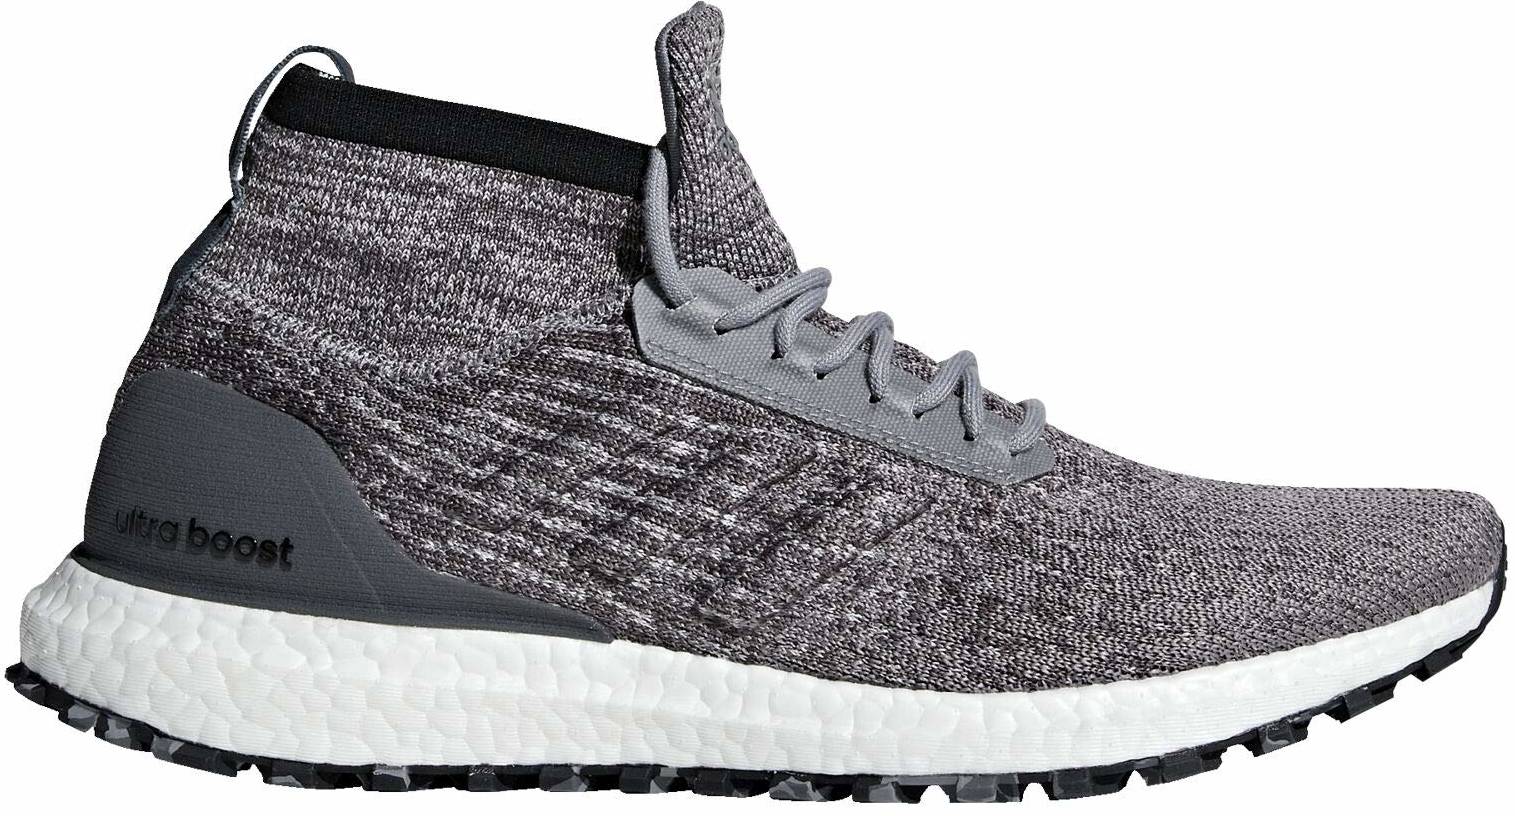 Adidas Ultraboost Running Shoes Save Up To 51 Runrepeat